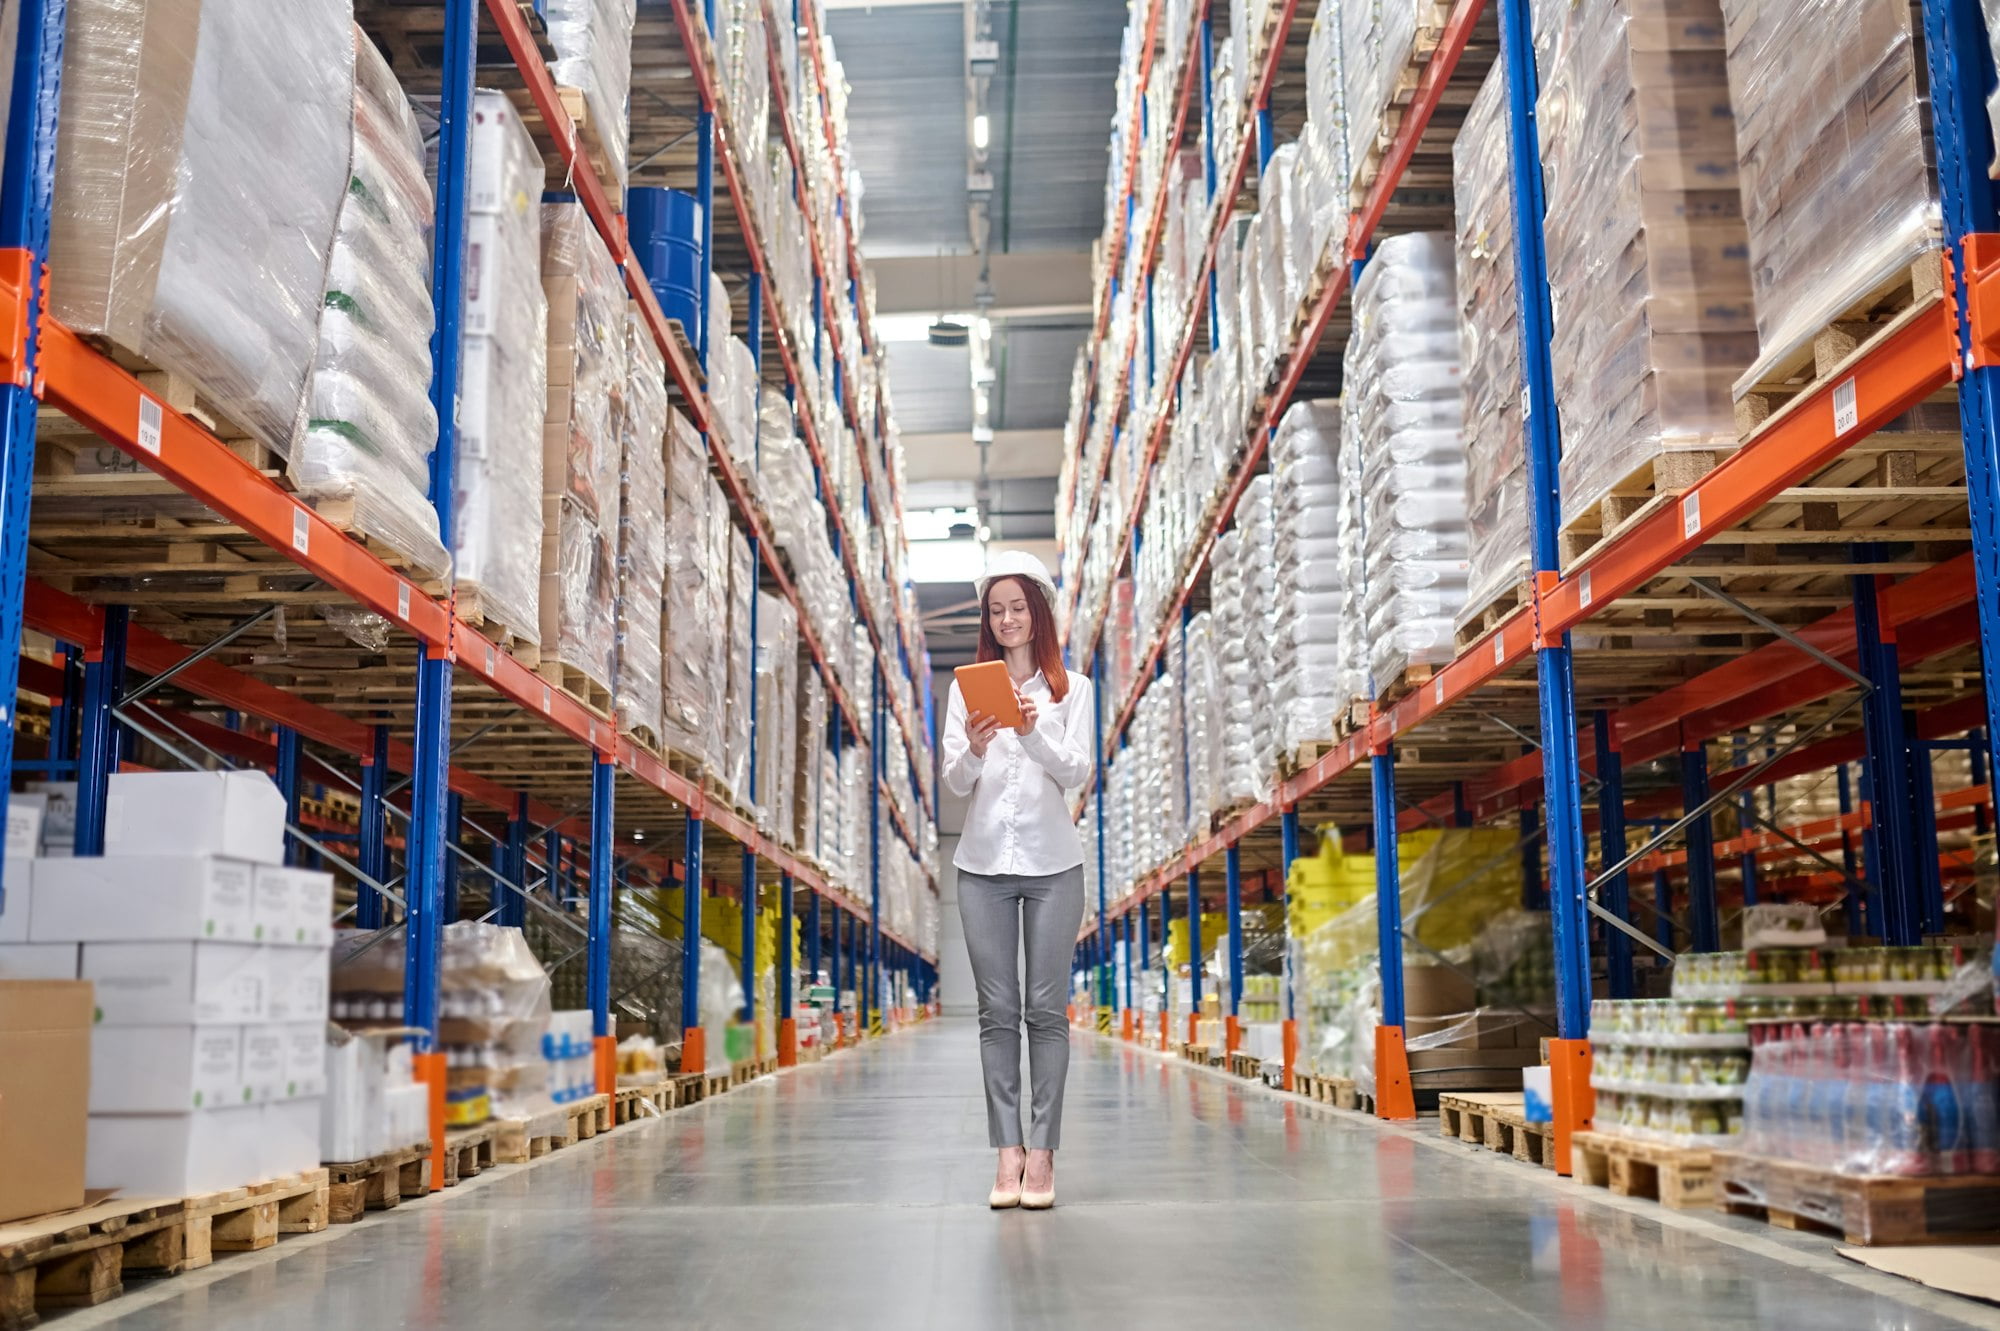 Elegant woman with tablet standing in warehouse aisle